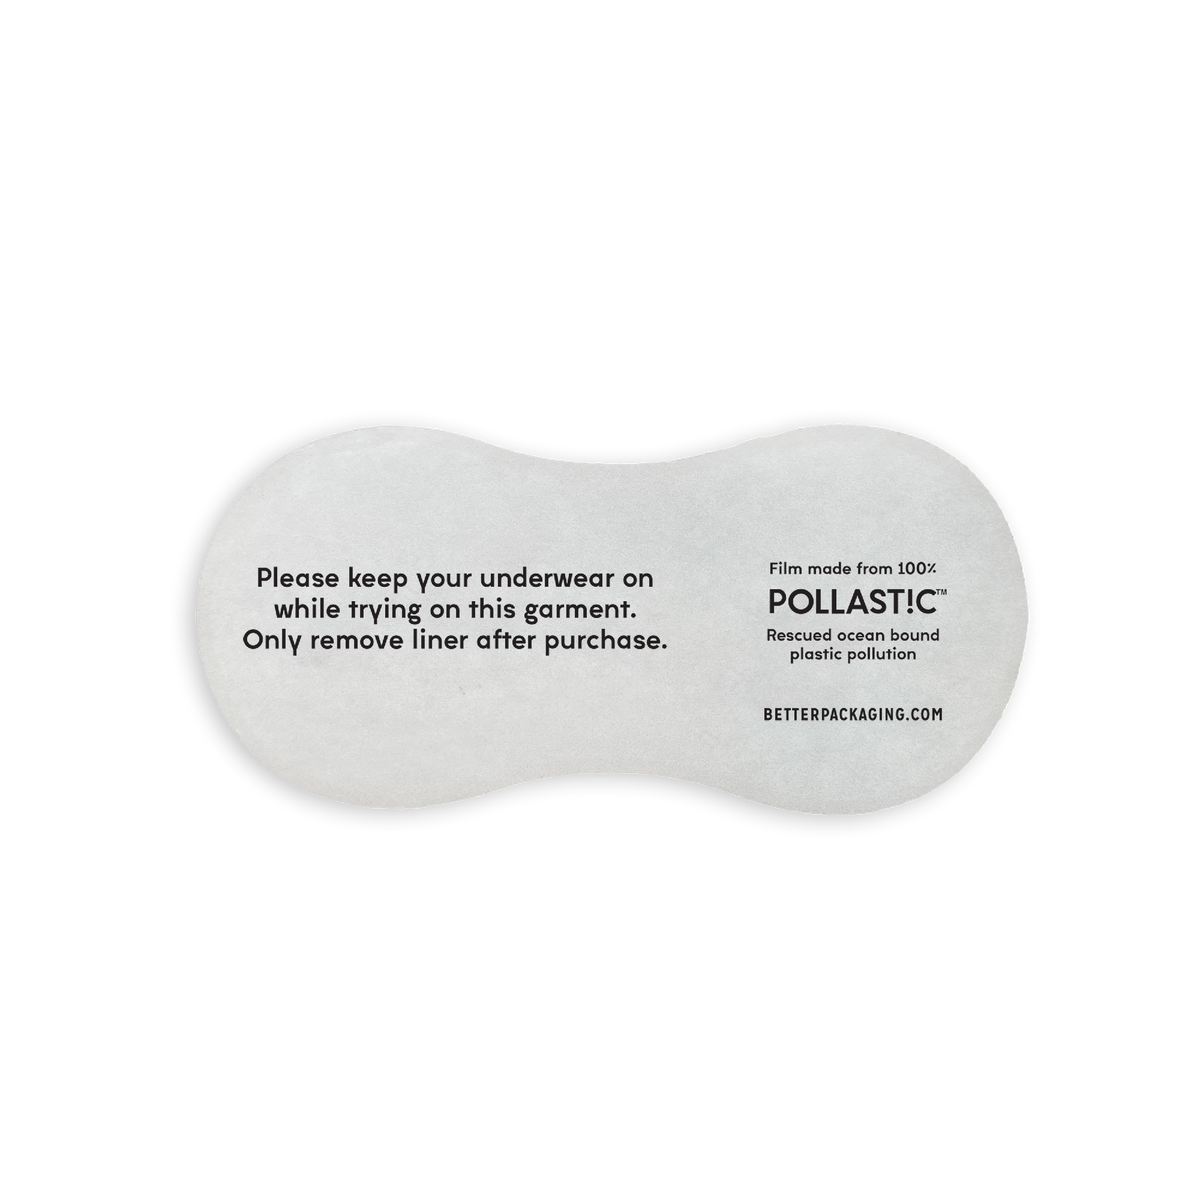 A Better Packaging POLLAST!C hygiene liner with usage instructions on a transparent background